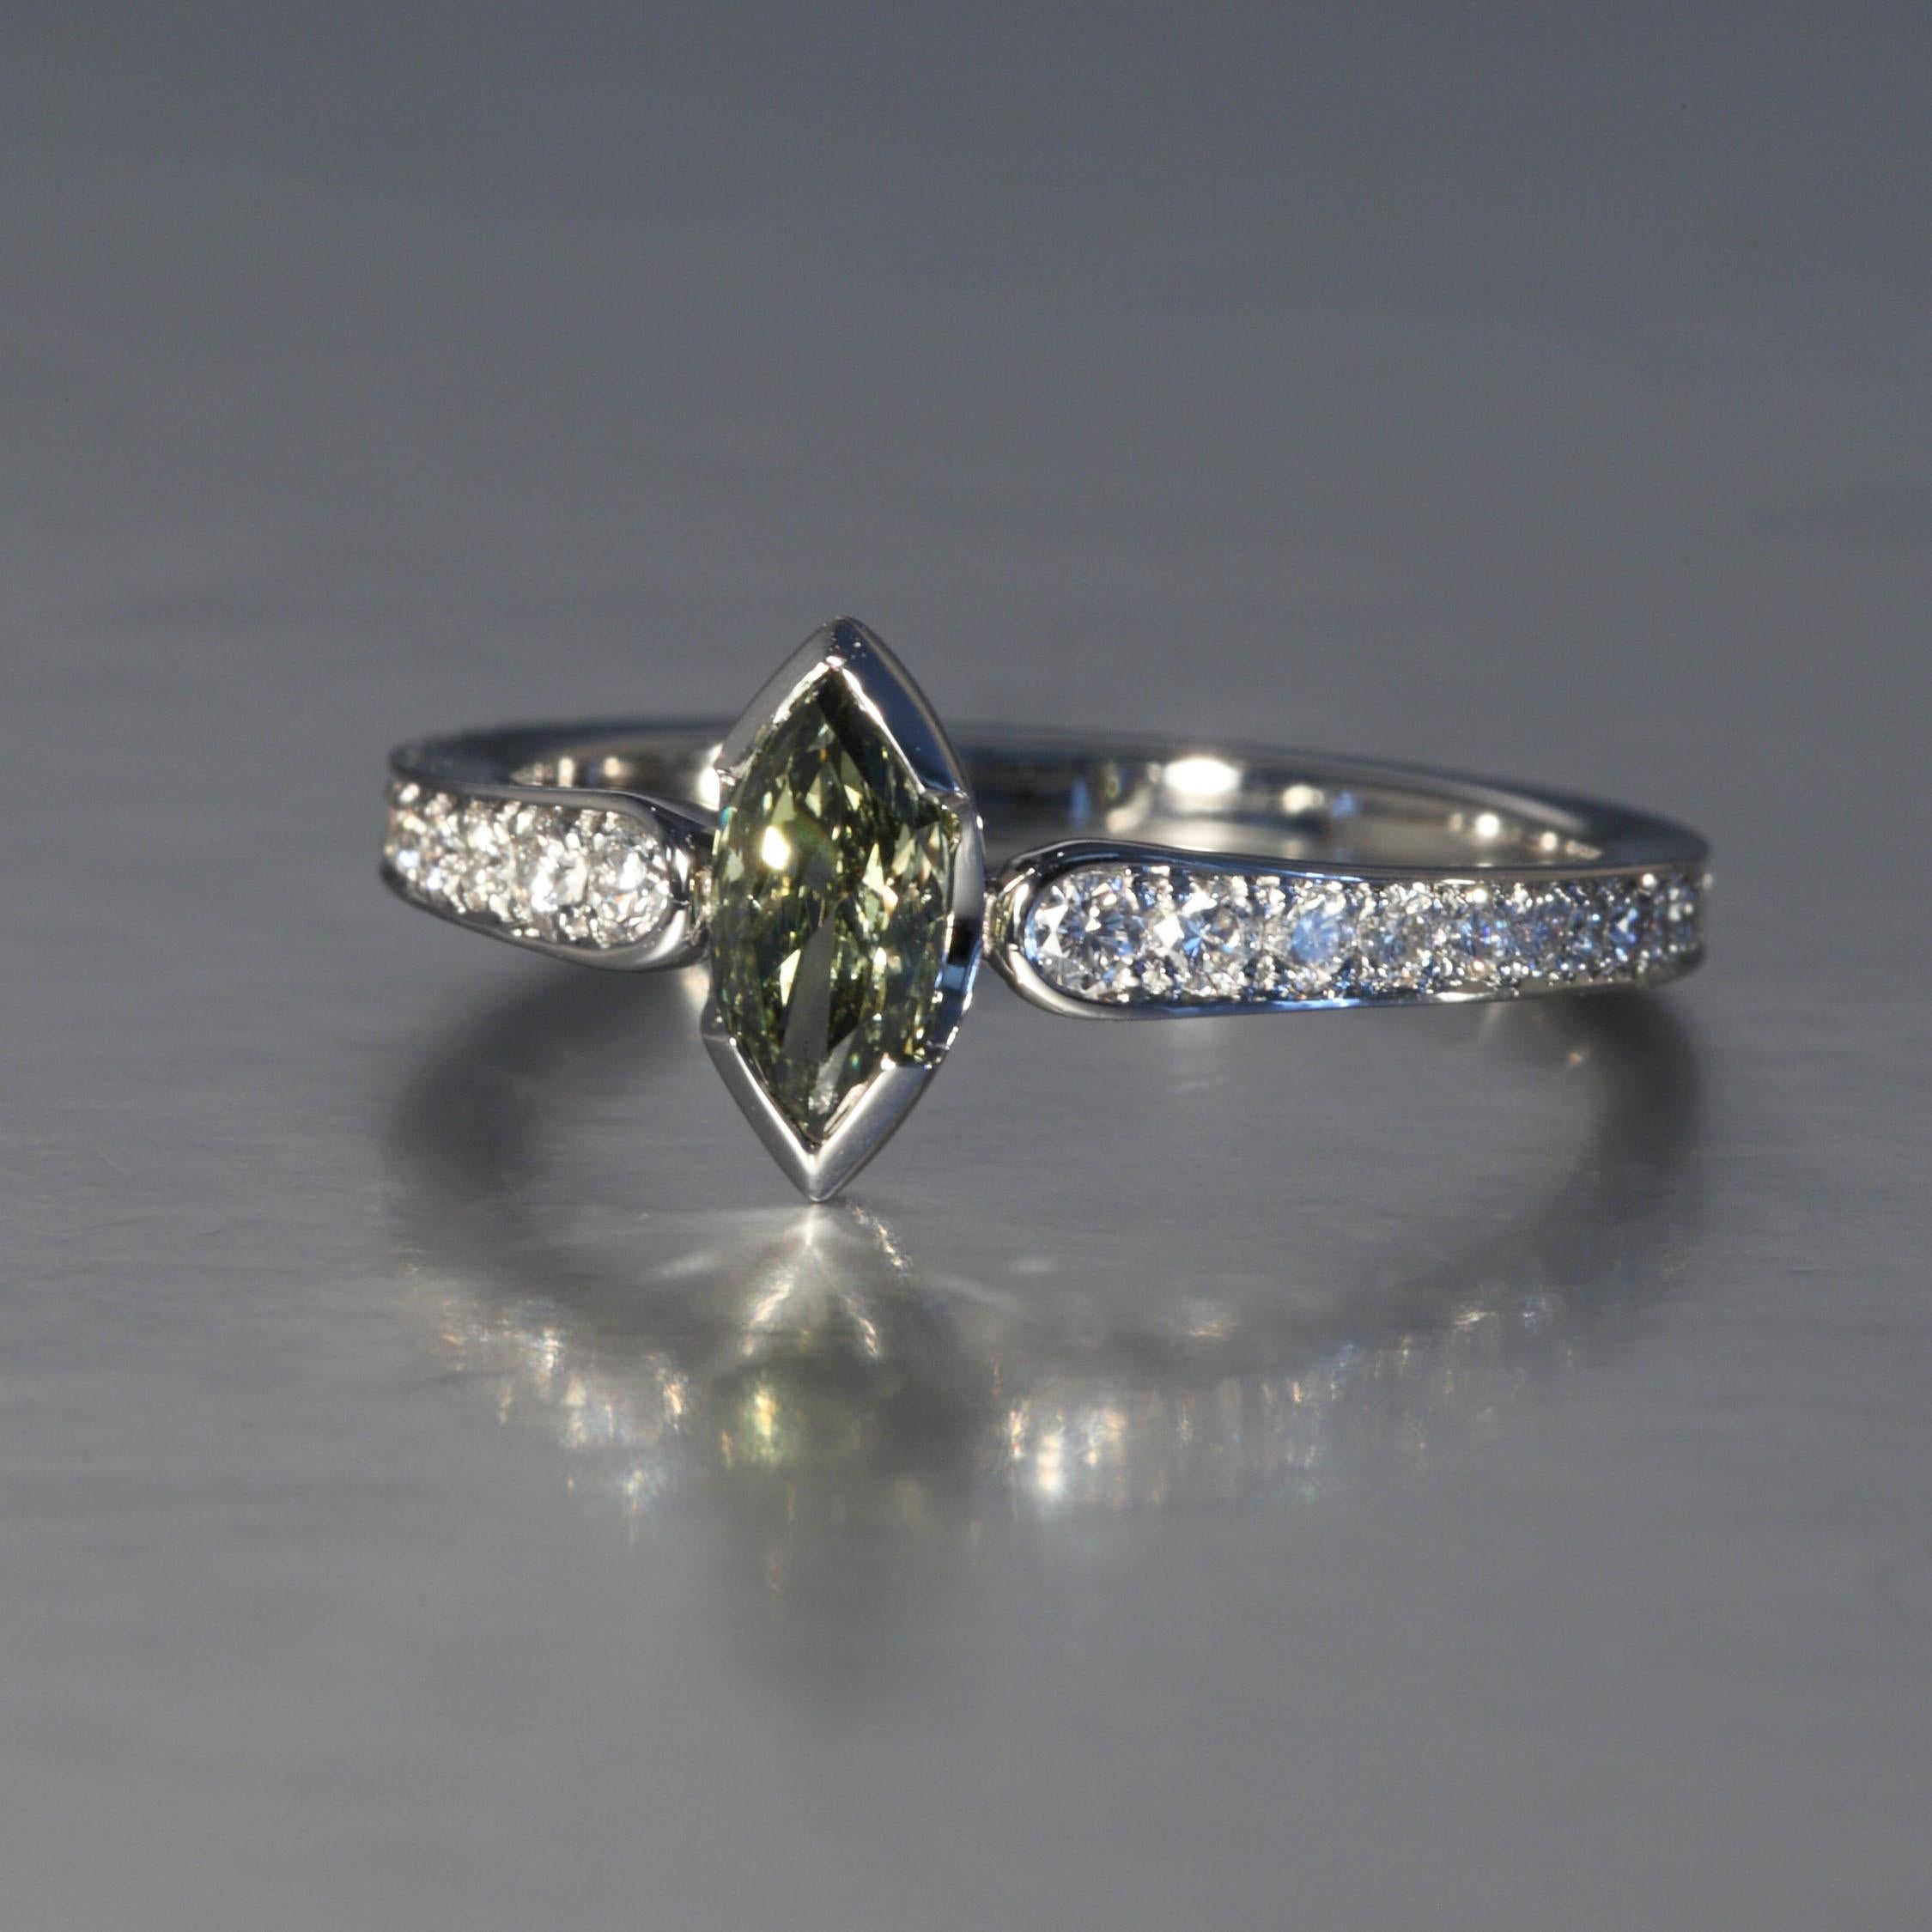 This 0.45 carat natural, fancy grayish yellowish green marquise cut diamond is accompanied by a GIA certificate. The ring is mounted in platinum with additional 0.20 carats brilliant cut diamonds F,G vvs. This one of a kind piece is designed and